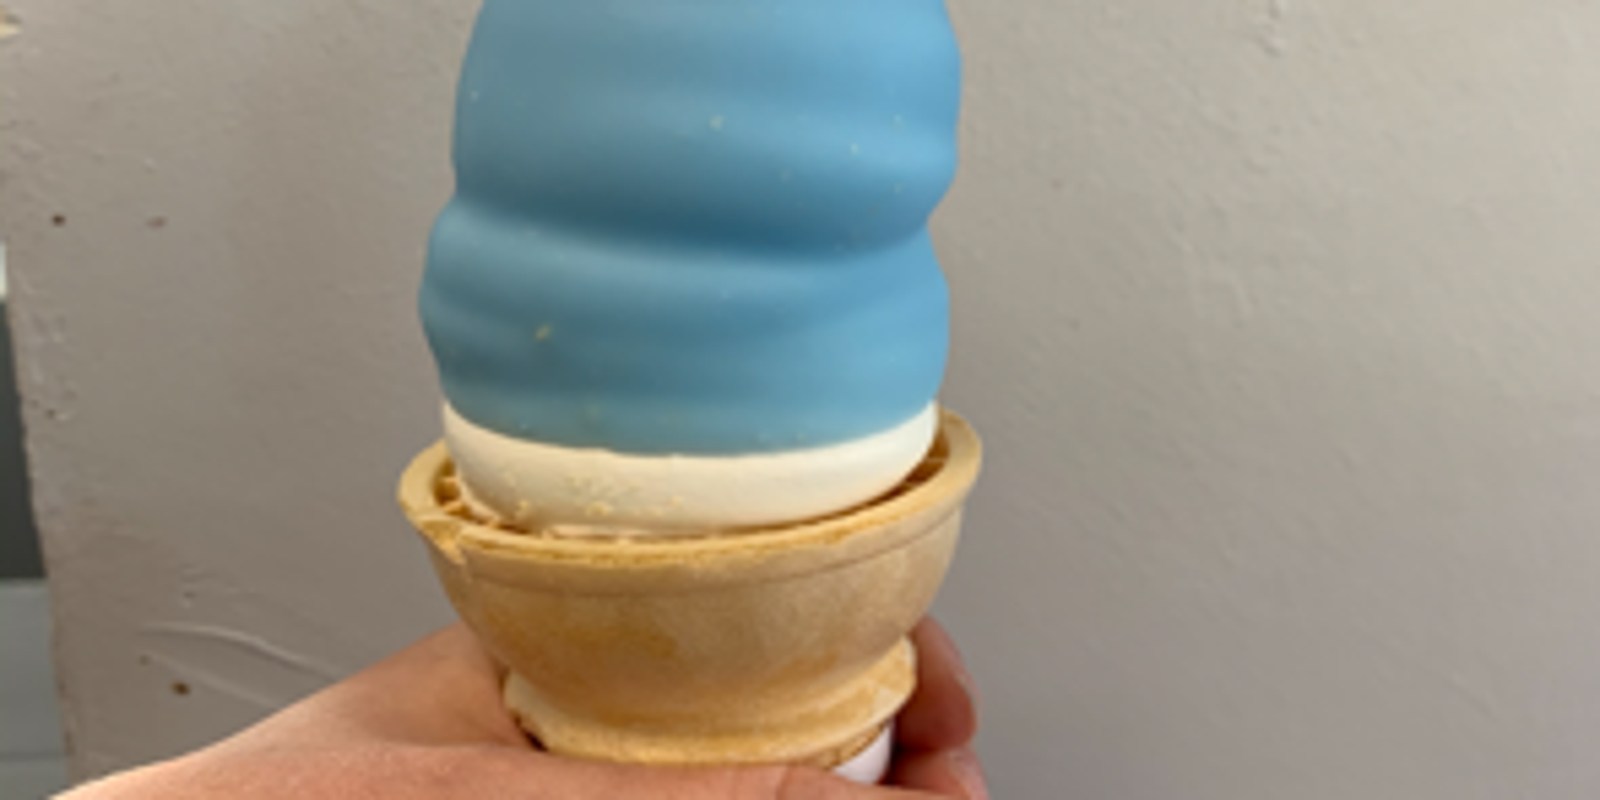 Dairy Queen's new Cotton Candy Dipped Cone is sweet, blue and 'a huge hit'